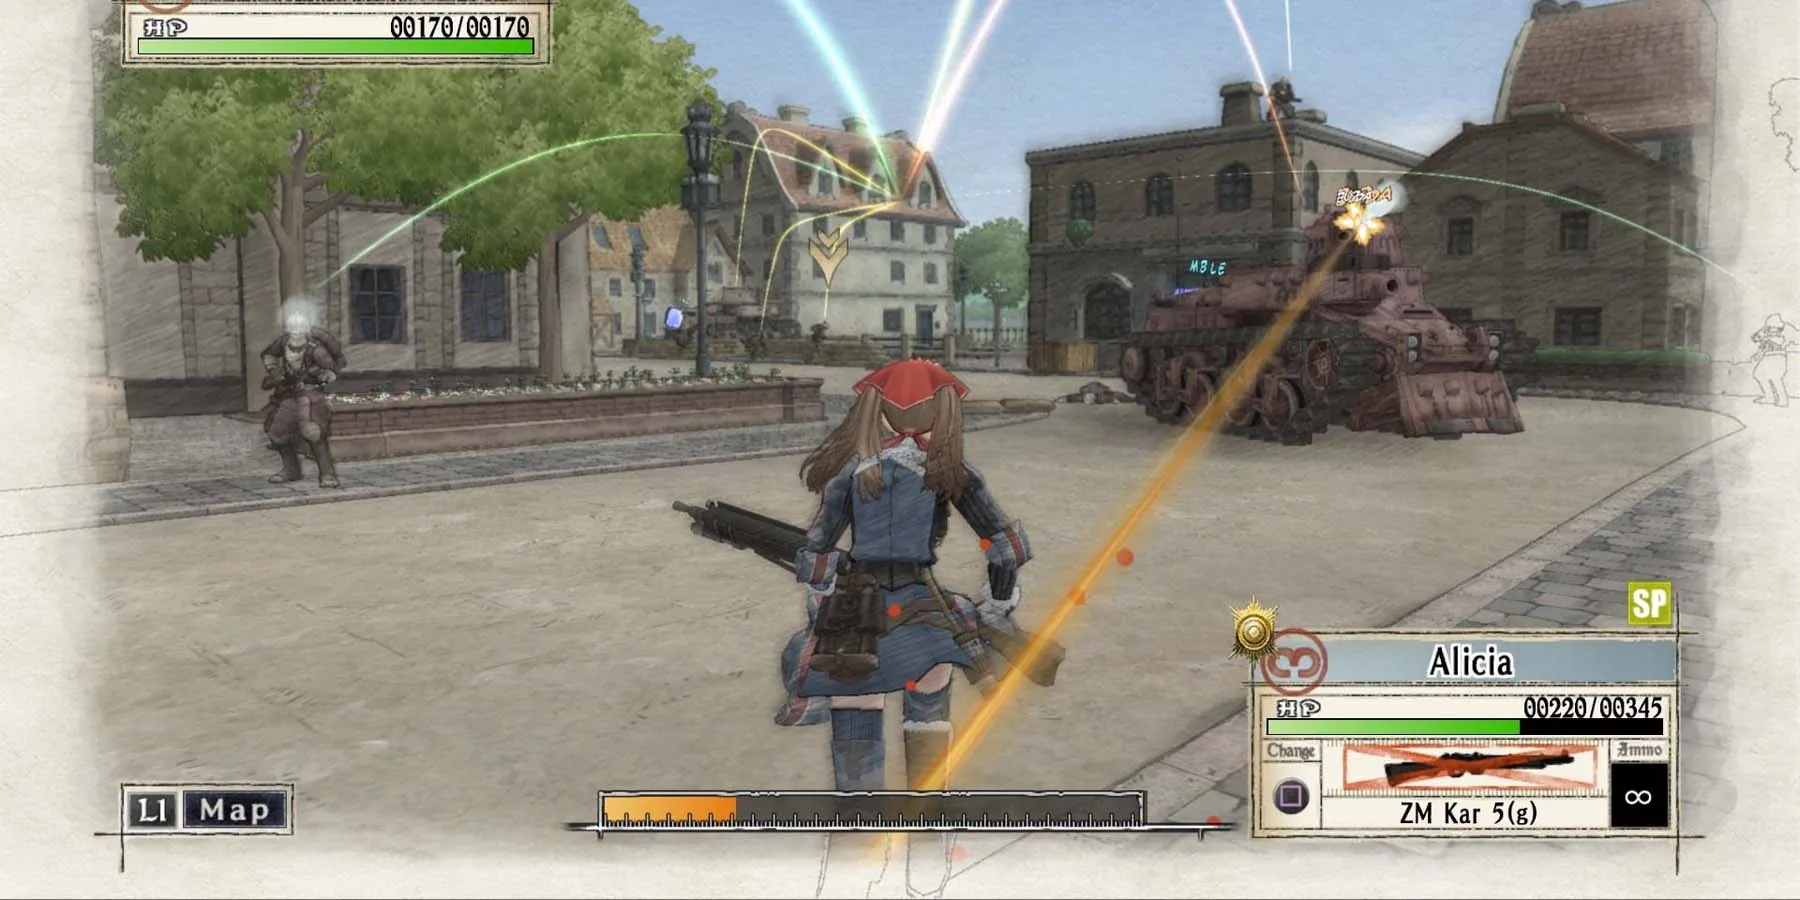 Valkyria Chronicles Remastered - Alicia shot at by tank